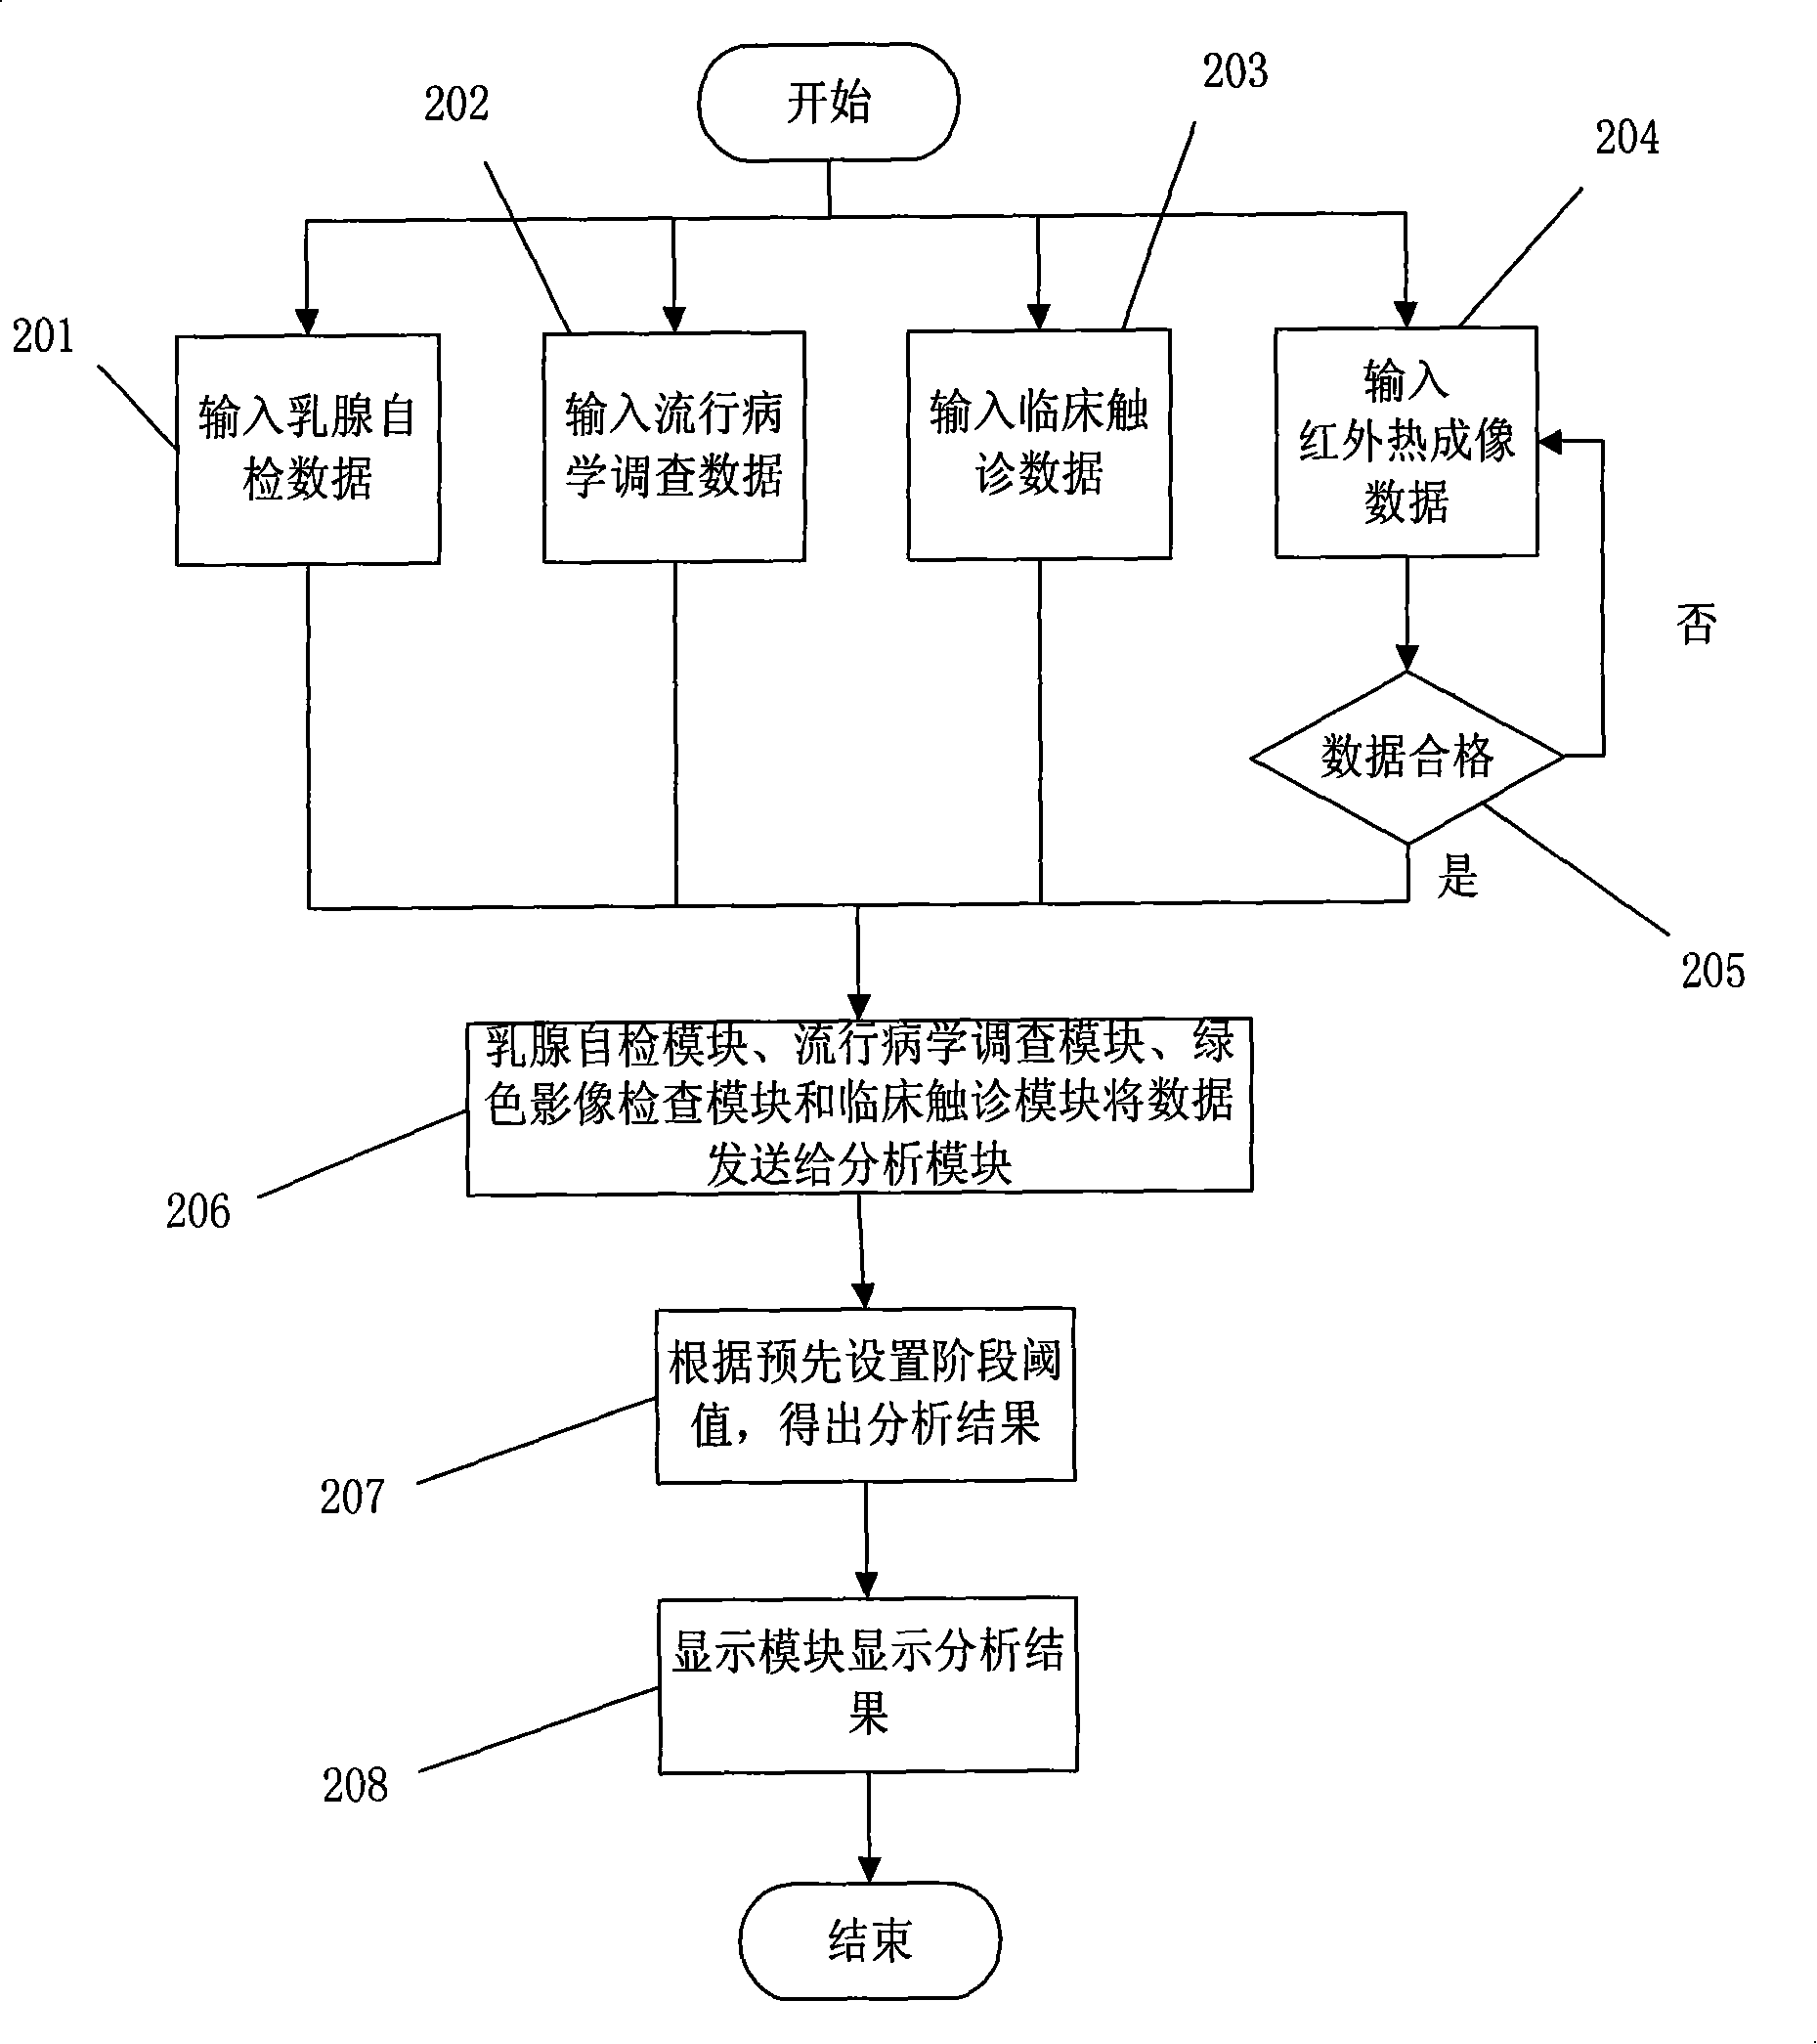 A computer-aided diagnosis system and method for mammary cancer